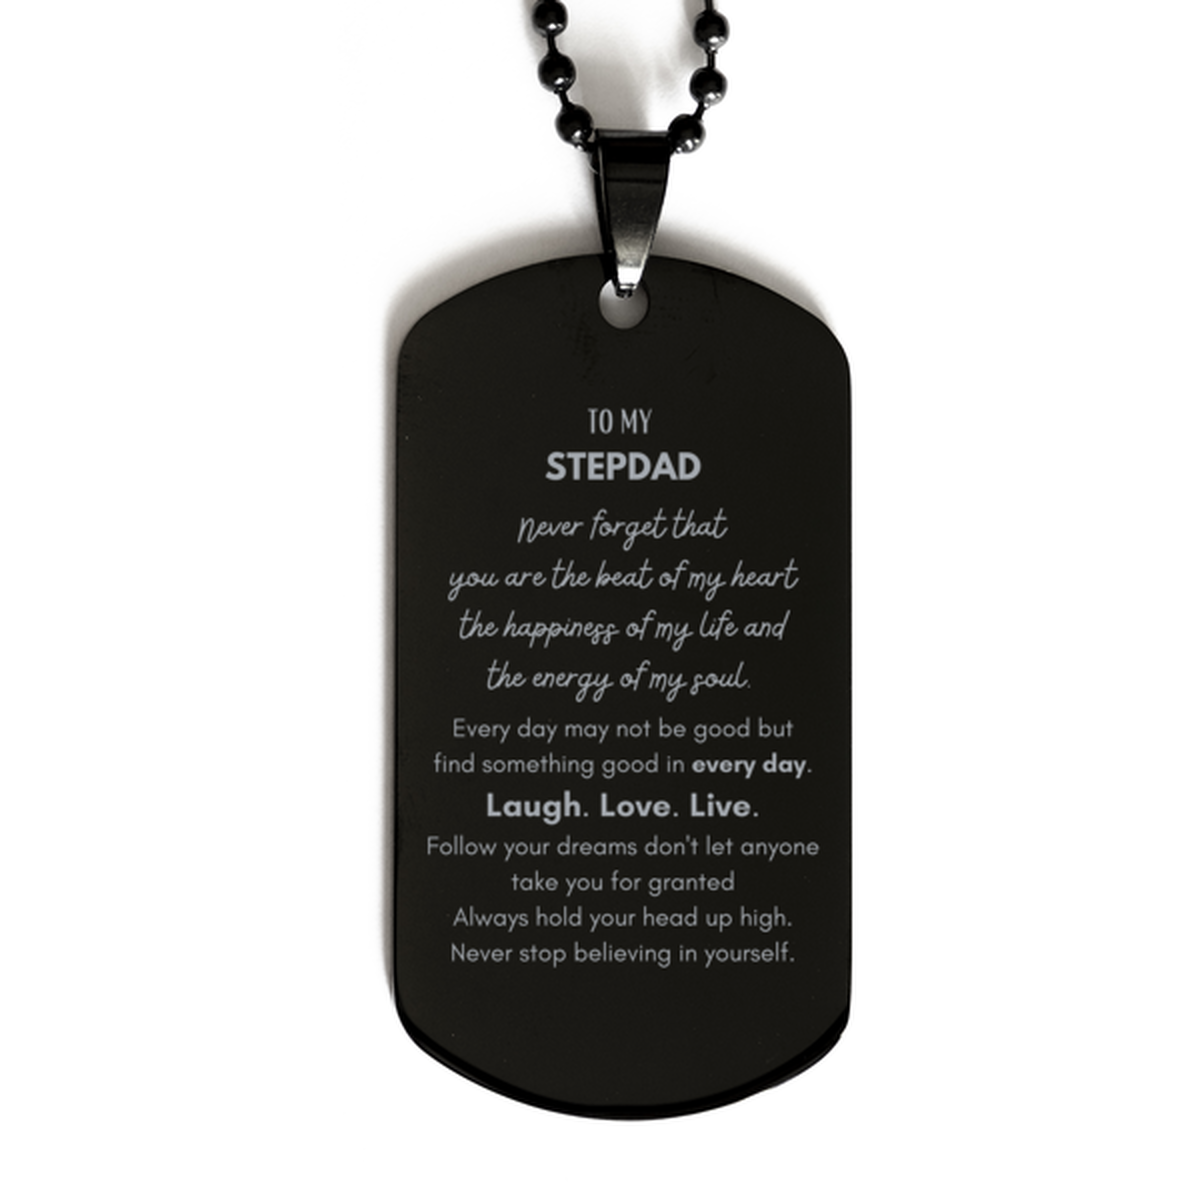 To My Stepdad Dogtag Gifts, Christmas Stepdad Black Dog Tag Present, Birthday Unique Motivational For Stepdad, To My Stepdad Never forget that you are the beat of my heart the happiness of my life and the energy of my soul